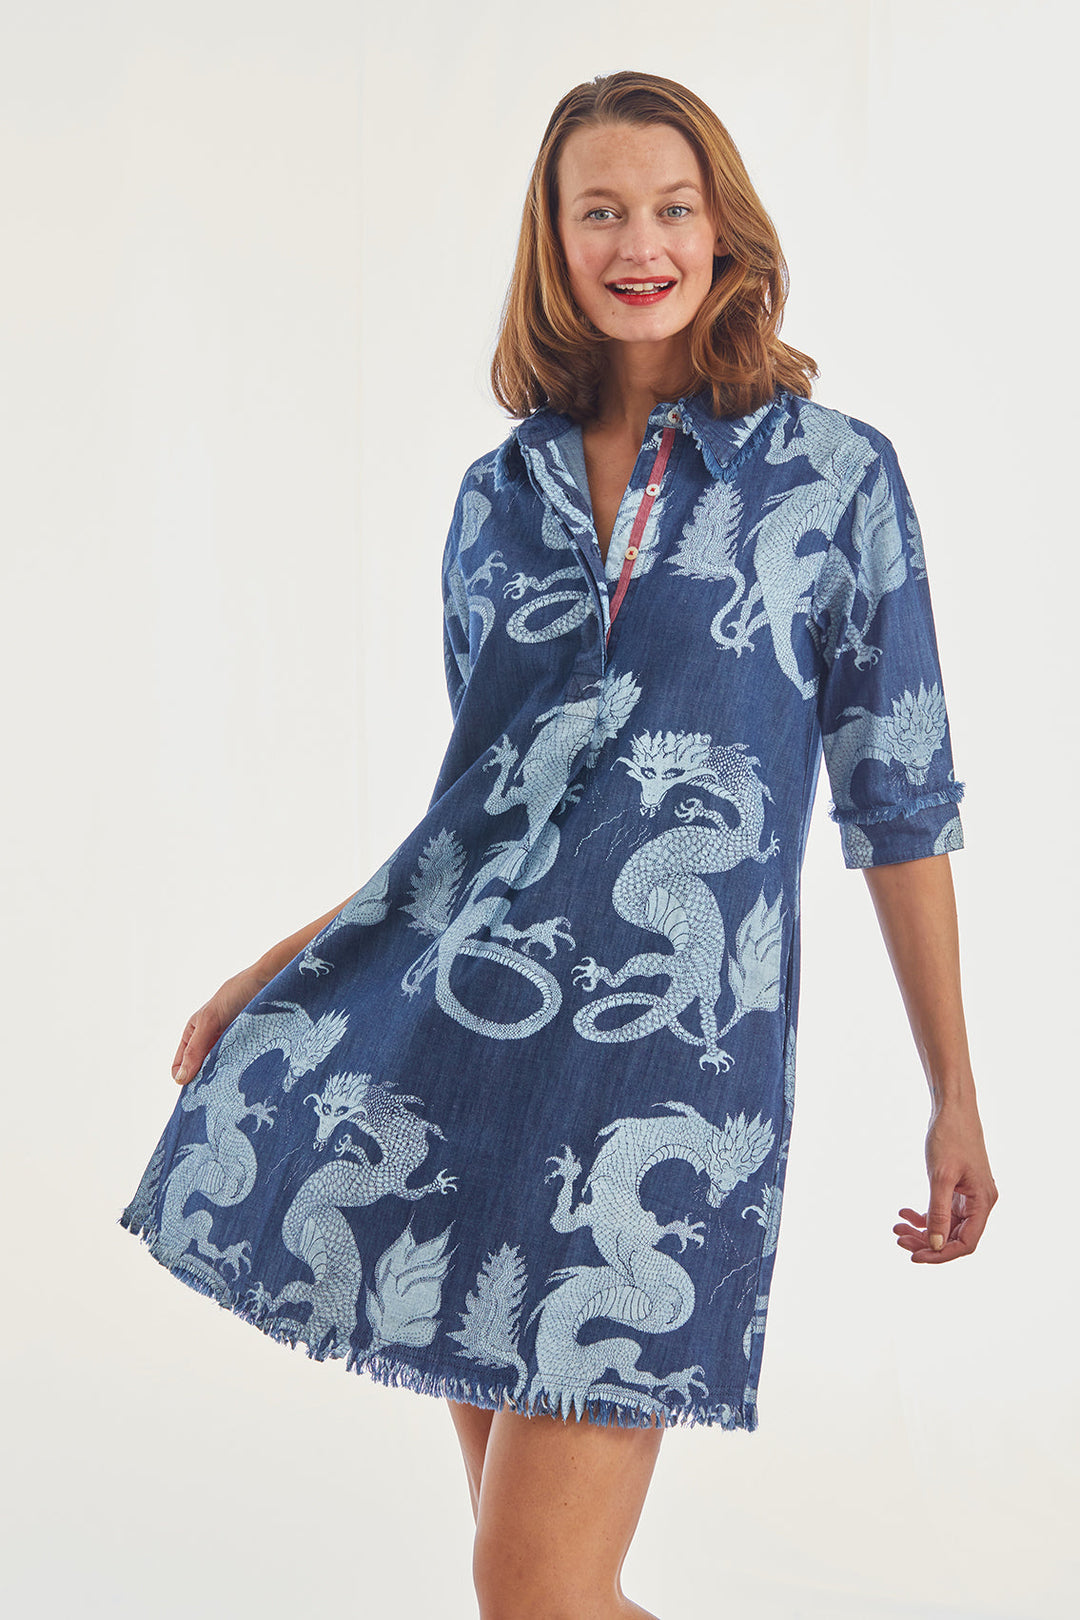 Chatham Dress Denim with All over print